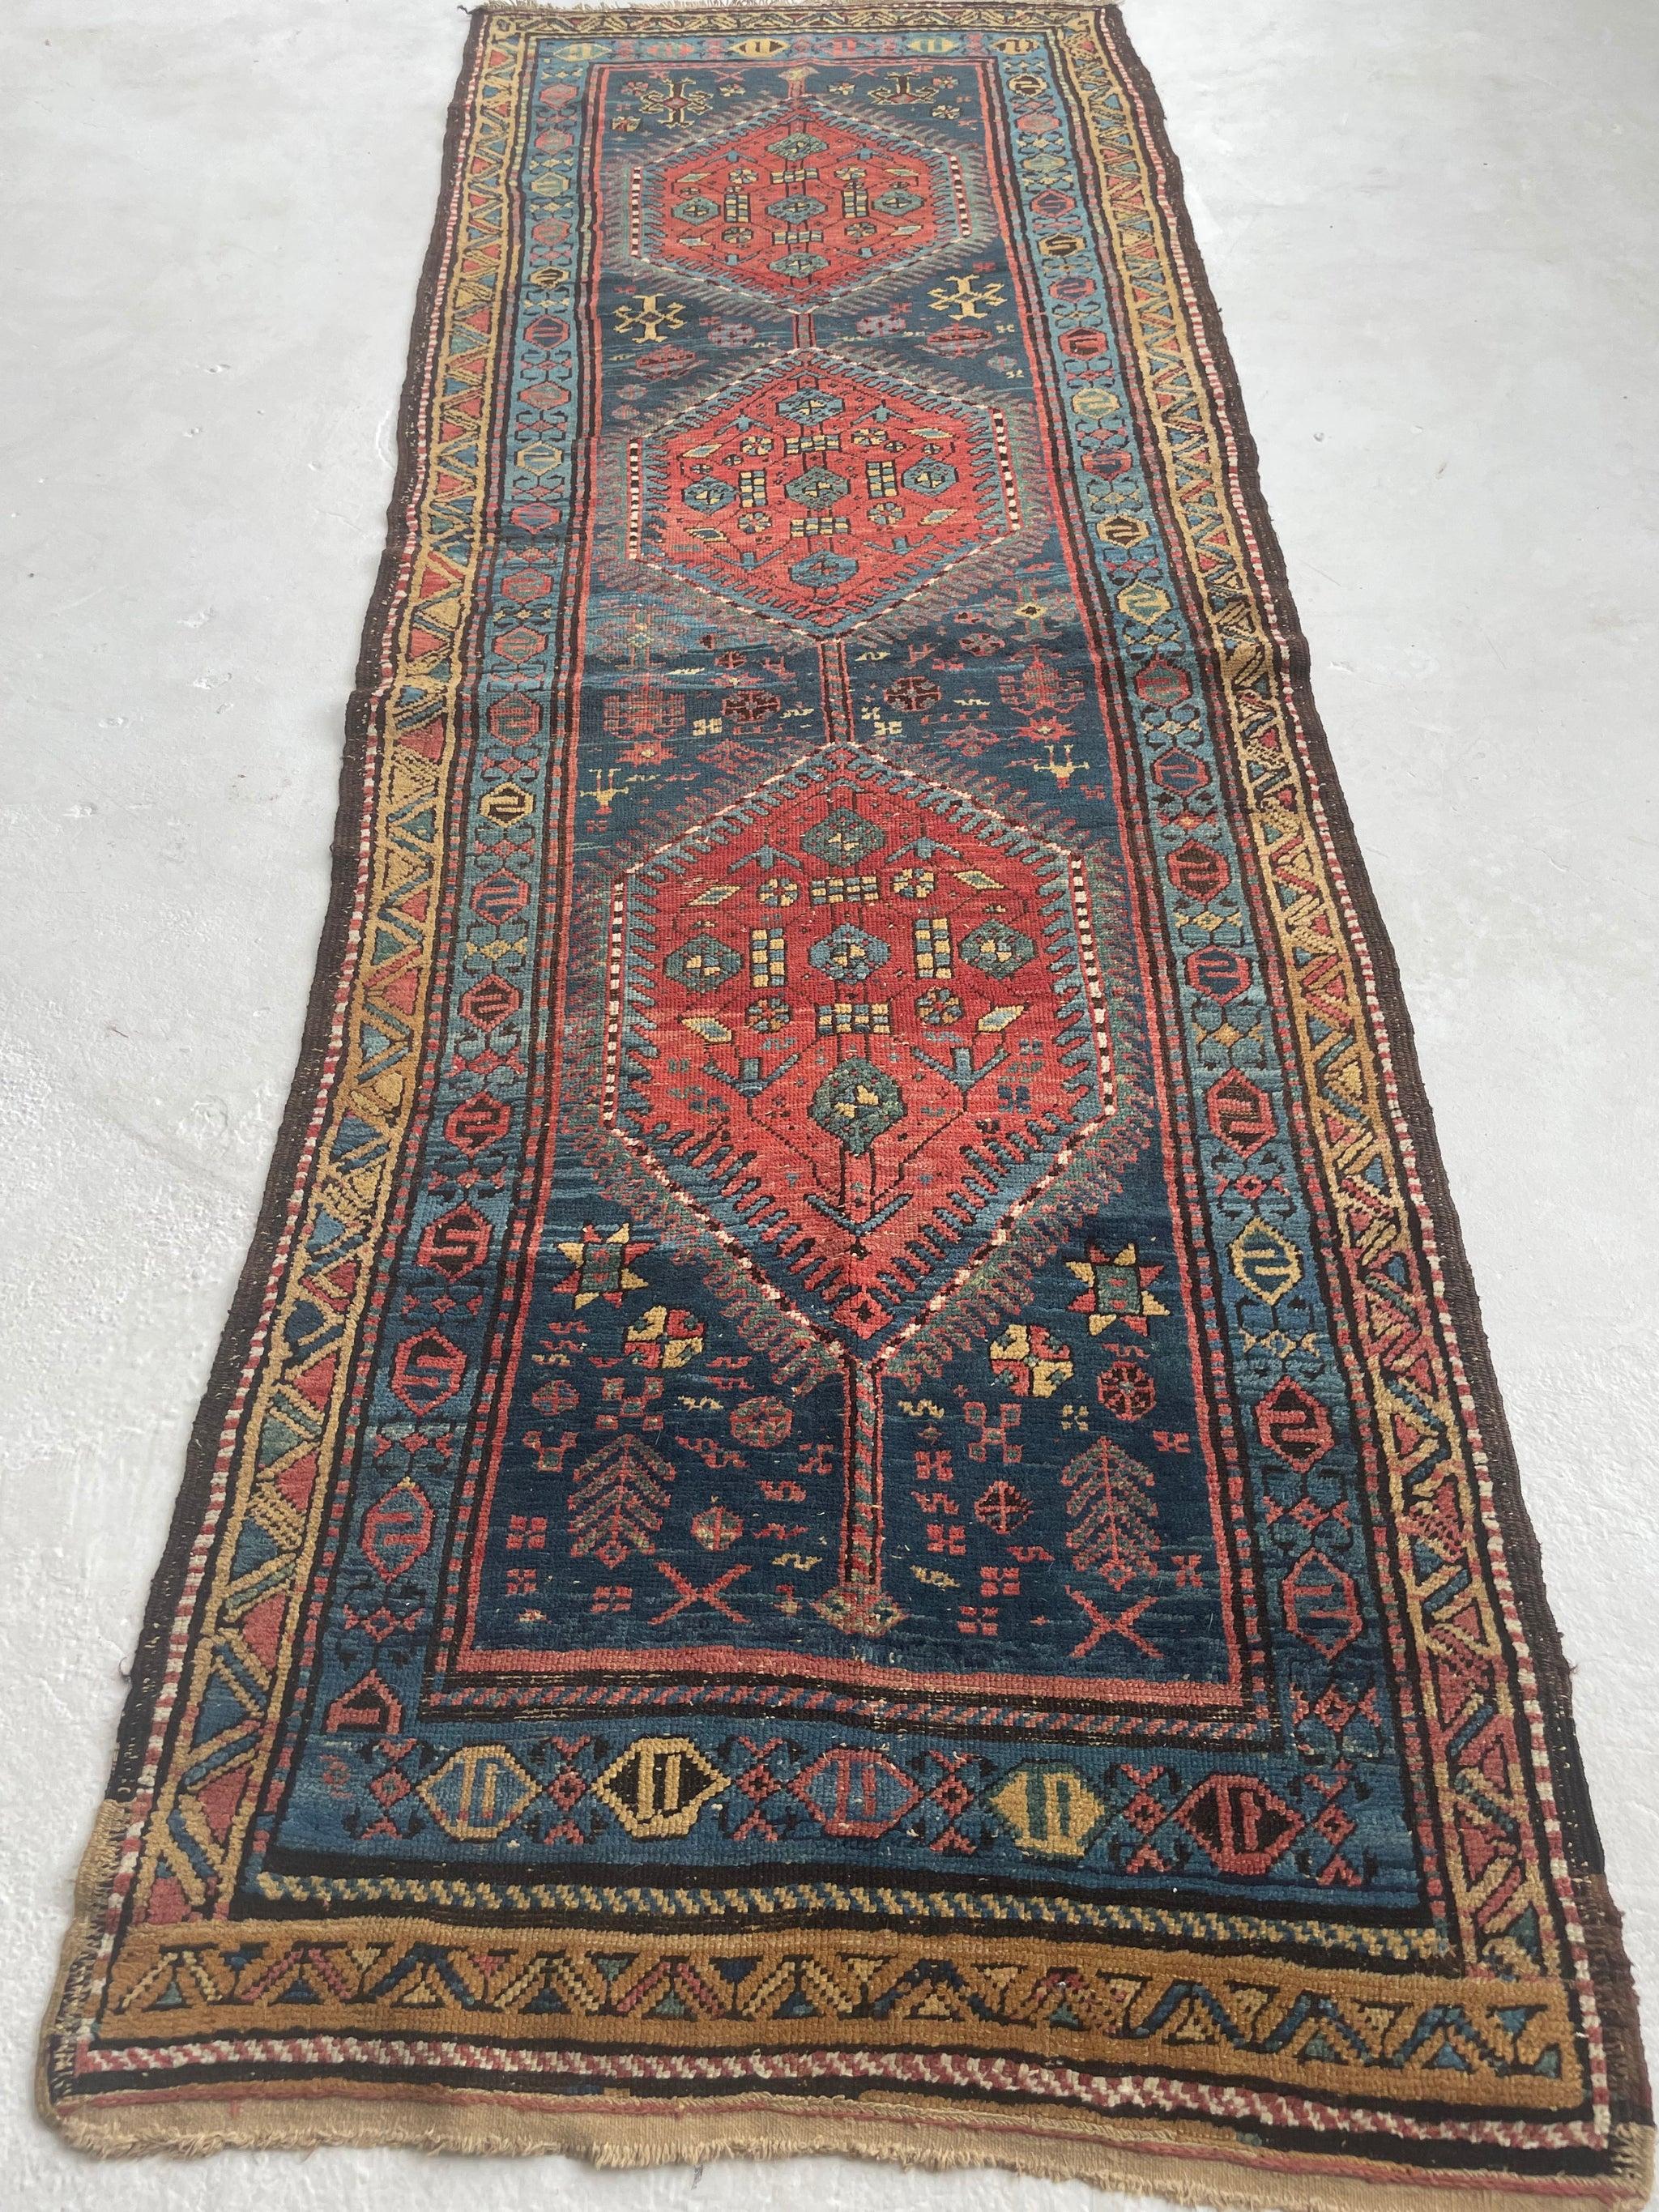 Charming Vintage Tribal Runner  Marbling Midnight Blue, Rust, Camel, Green

Size:  3.6 x 9.8
Age:  Antique, C. 1930's 
Pile: Low / Med with wonderful age-related wear; slight buckle in one area but with a pad it should be fine

This rug is